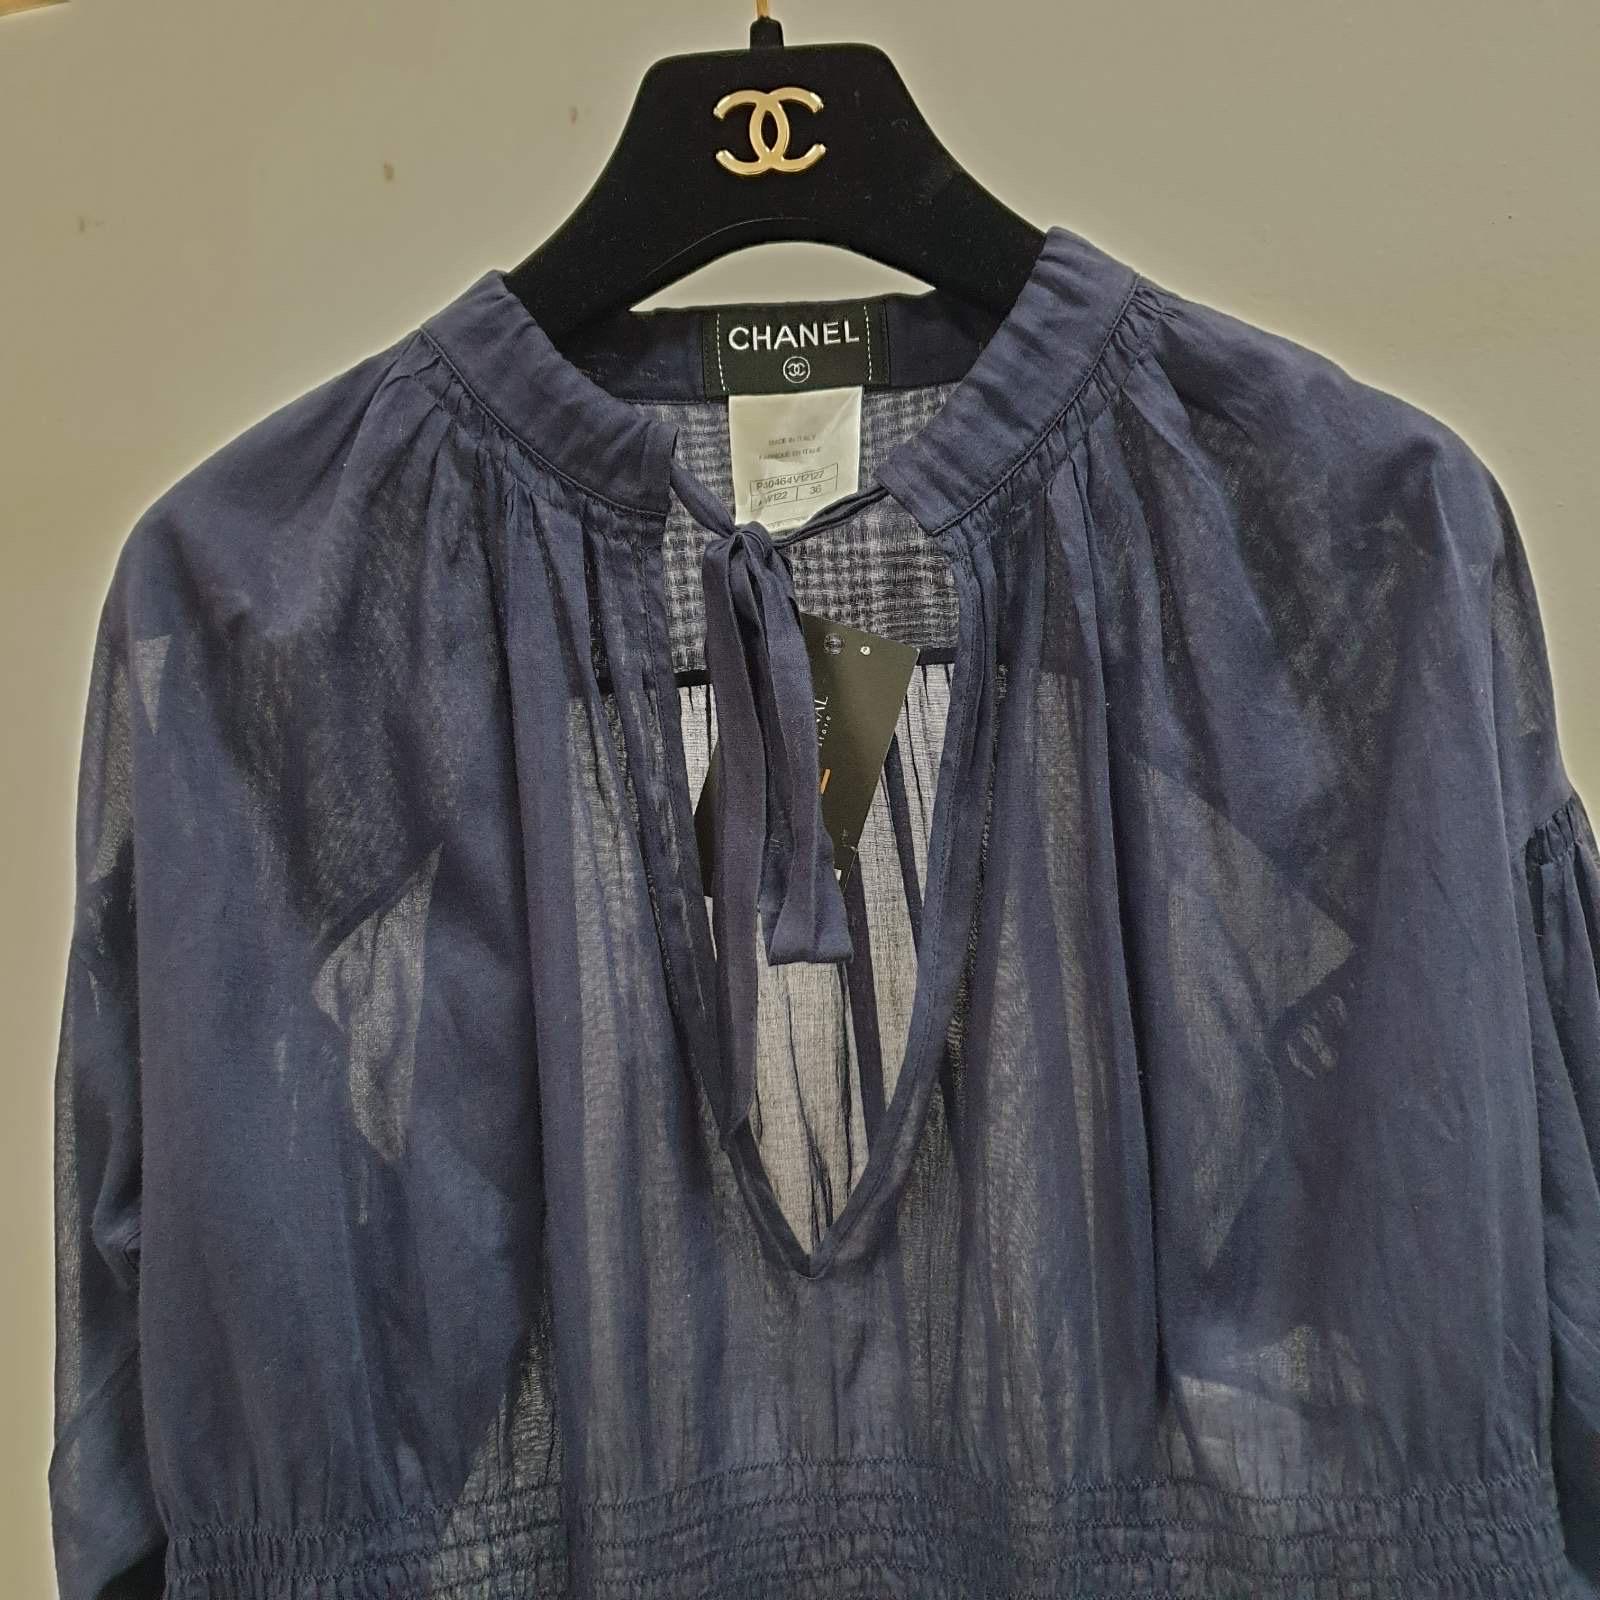 CHANEL smocked waist blouse in navy

Chanel prices have gone up a few times since these were made. They would be much higher in store today

This Chanel navy blue blouse is a fashionable and urban garment.

  Crafted from cotton, it features long